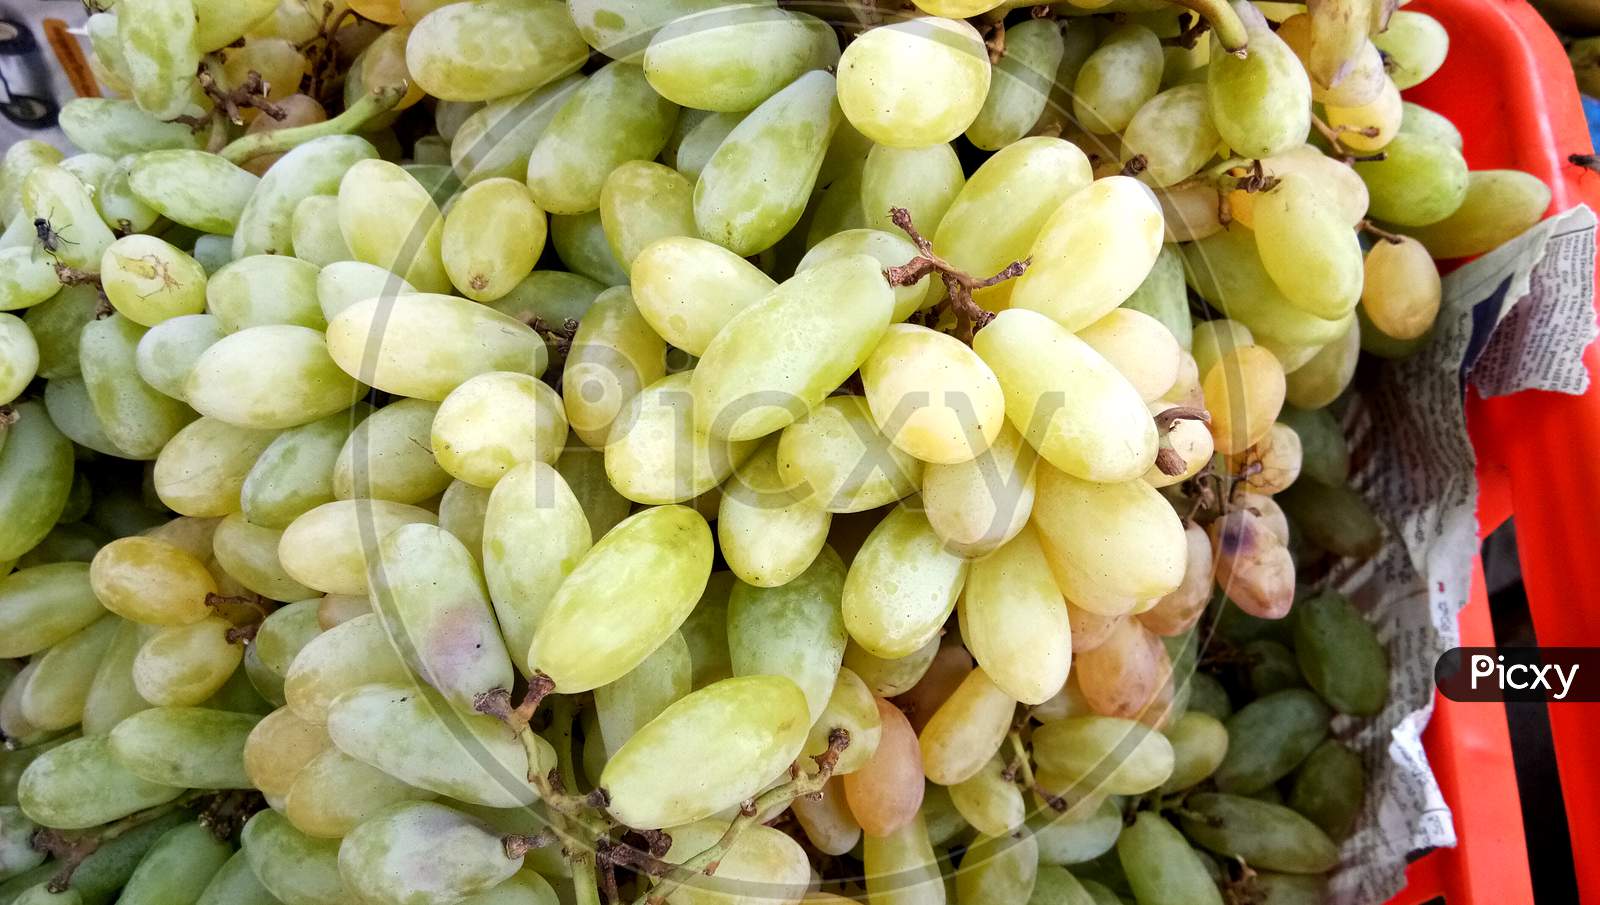 Ripe Delicious Grapes In The Market On The Counter